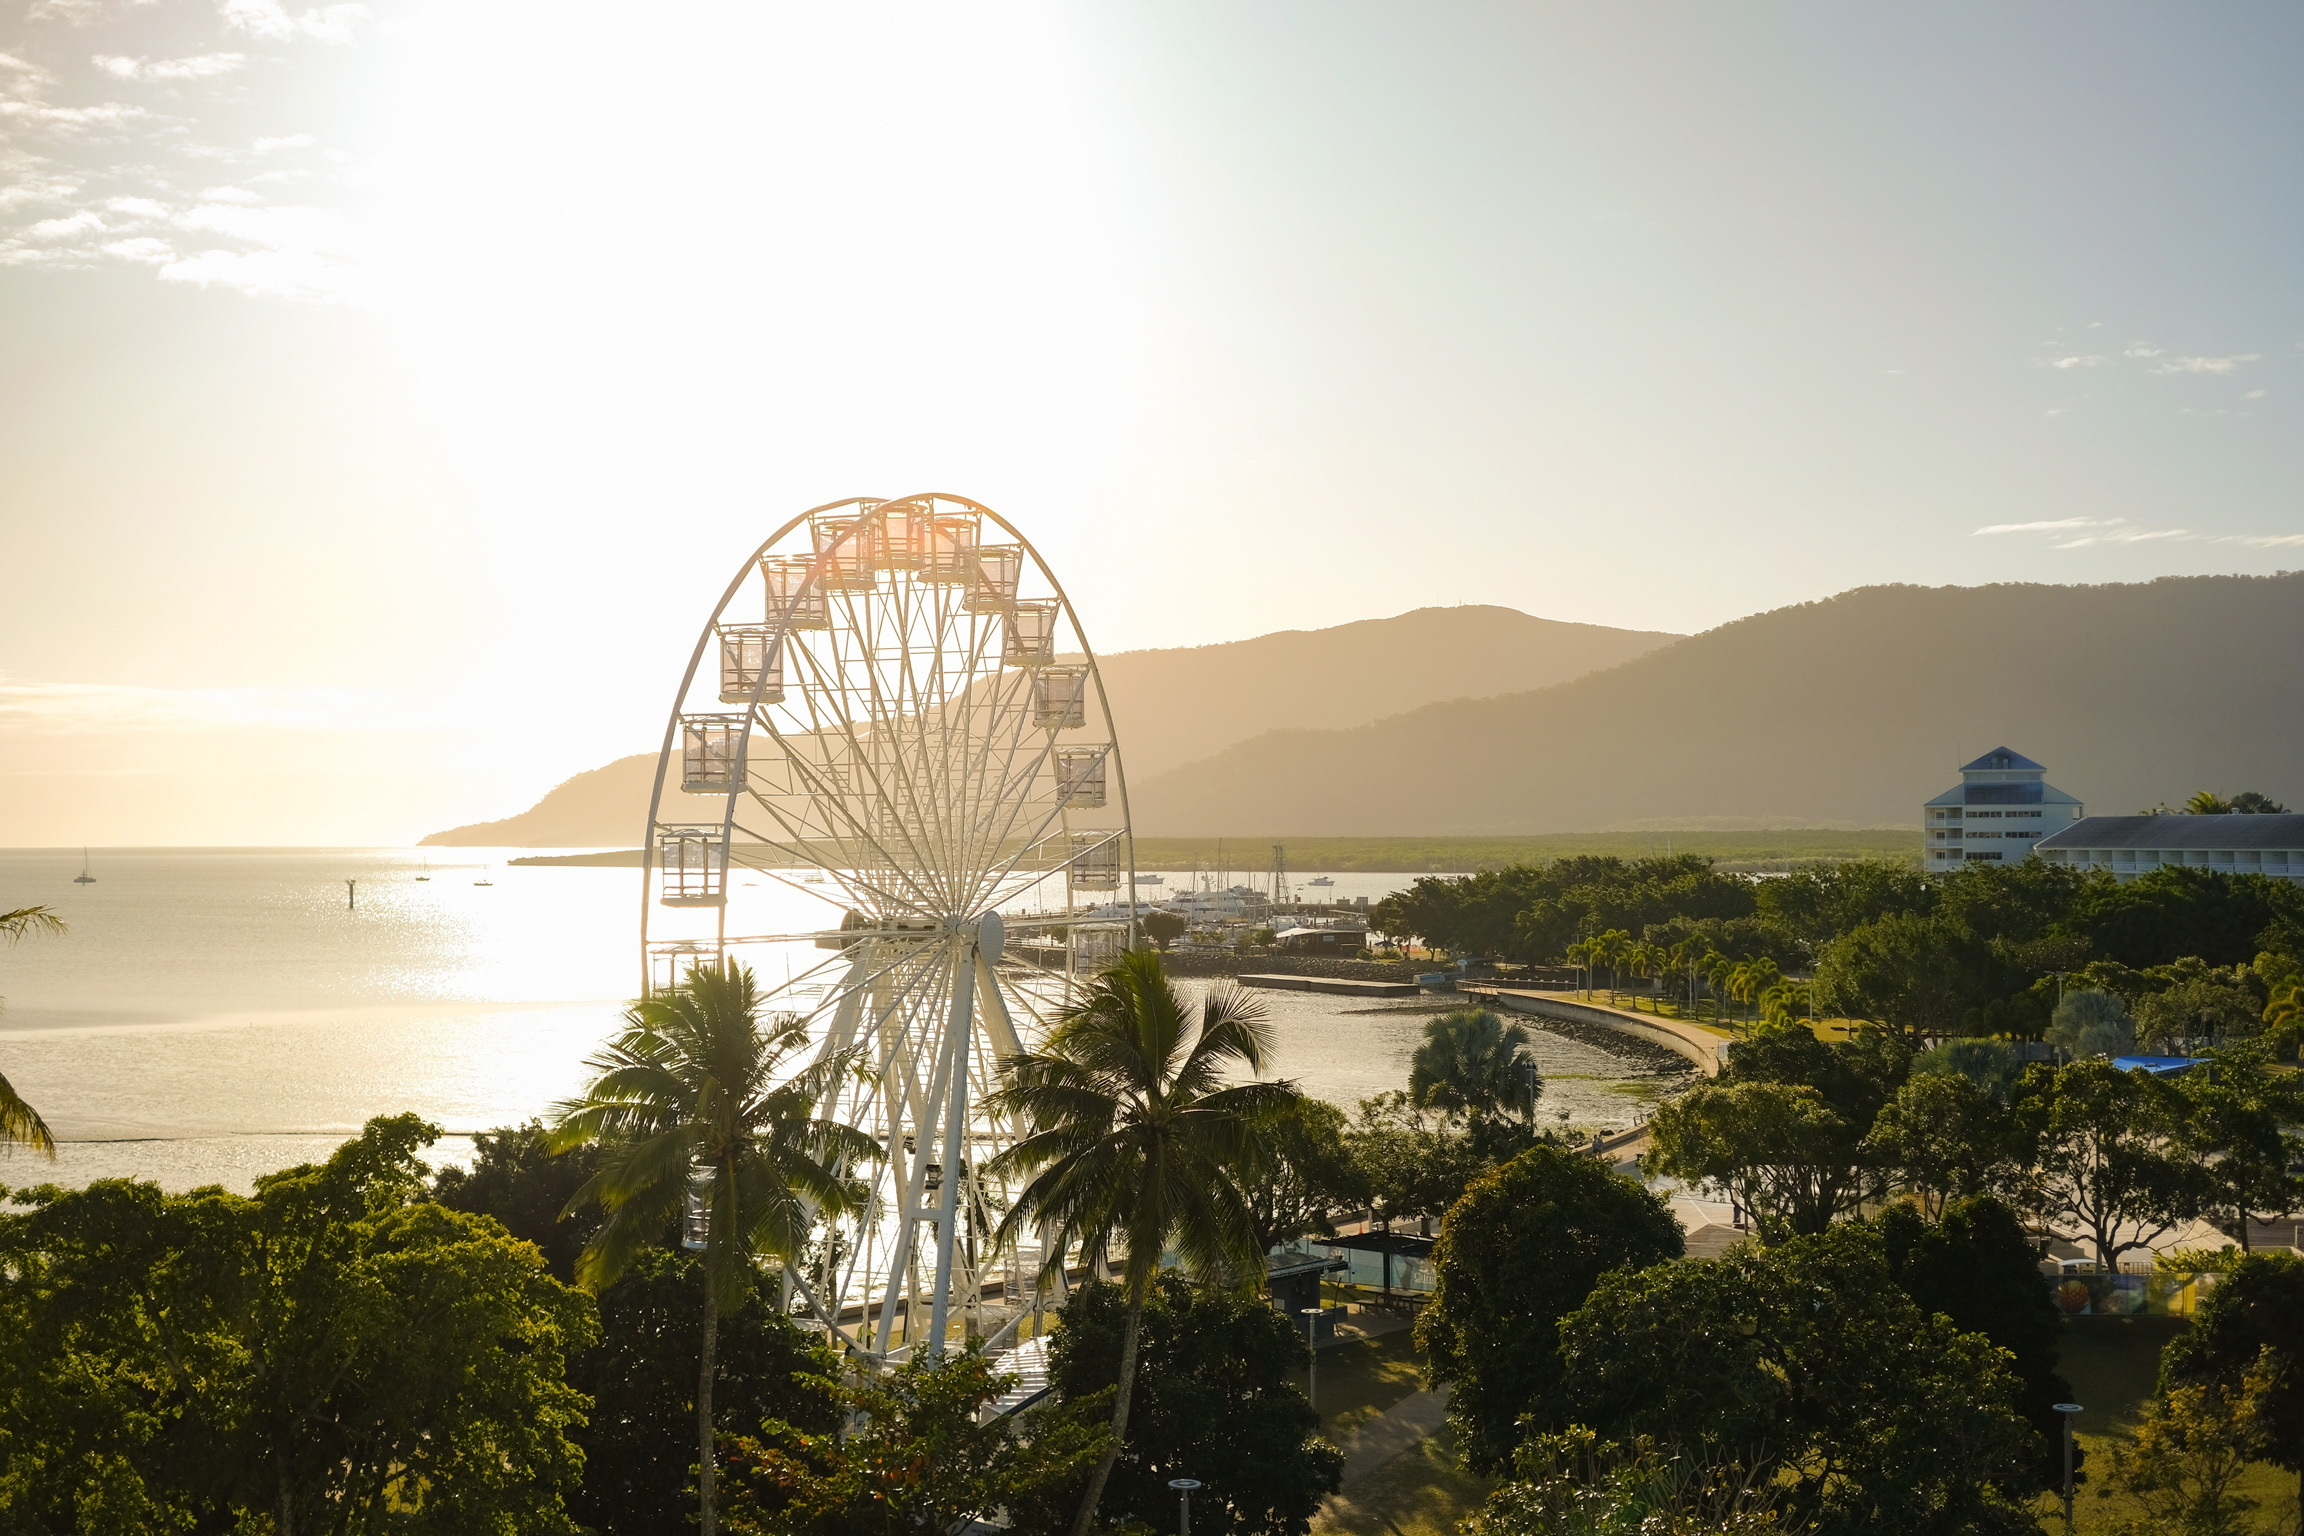 overview of Cairns city at sunrise with the ferris wheel and tropical foliage